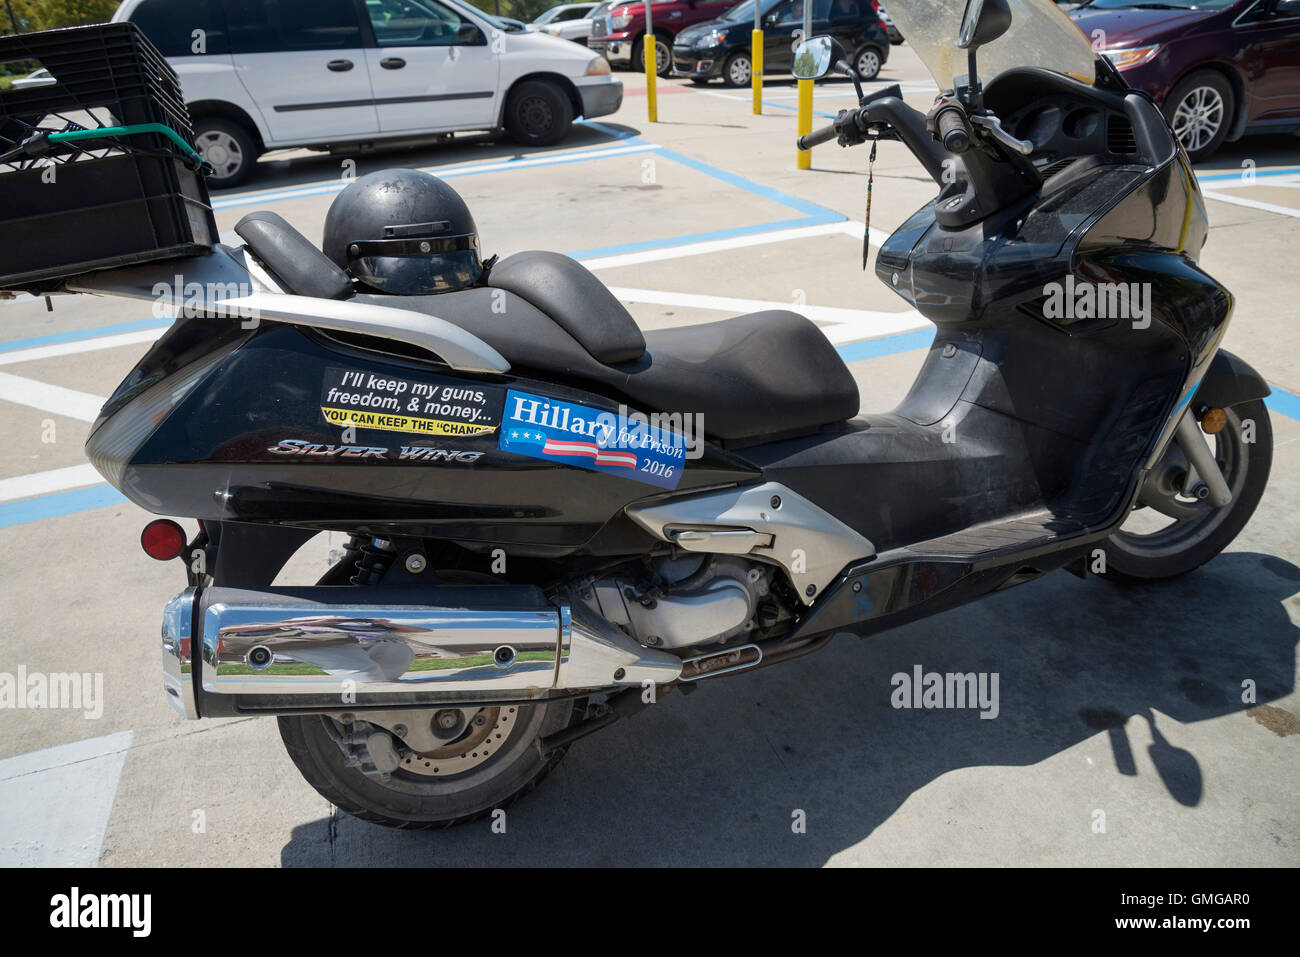 Hillary For Prison sticker on motorcycle. Stock Photo